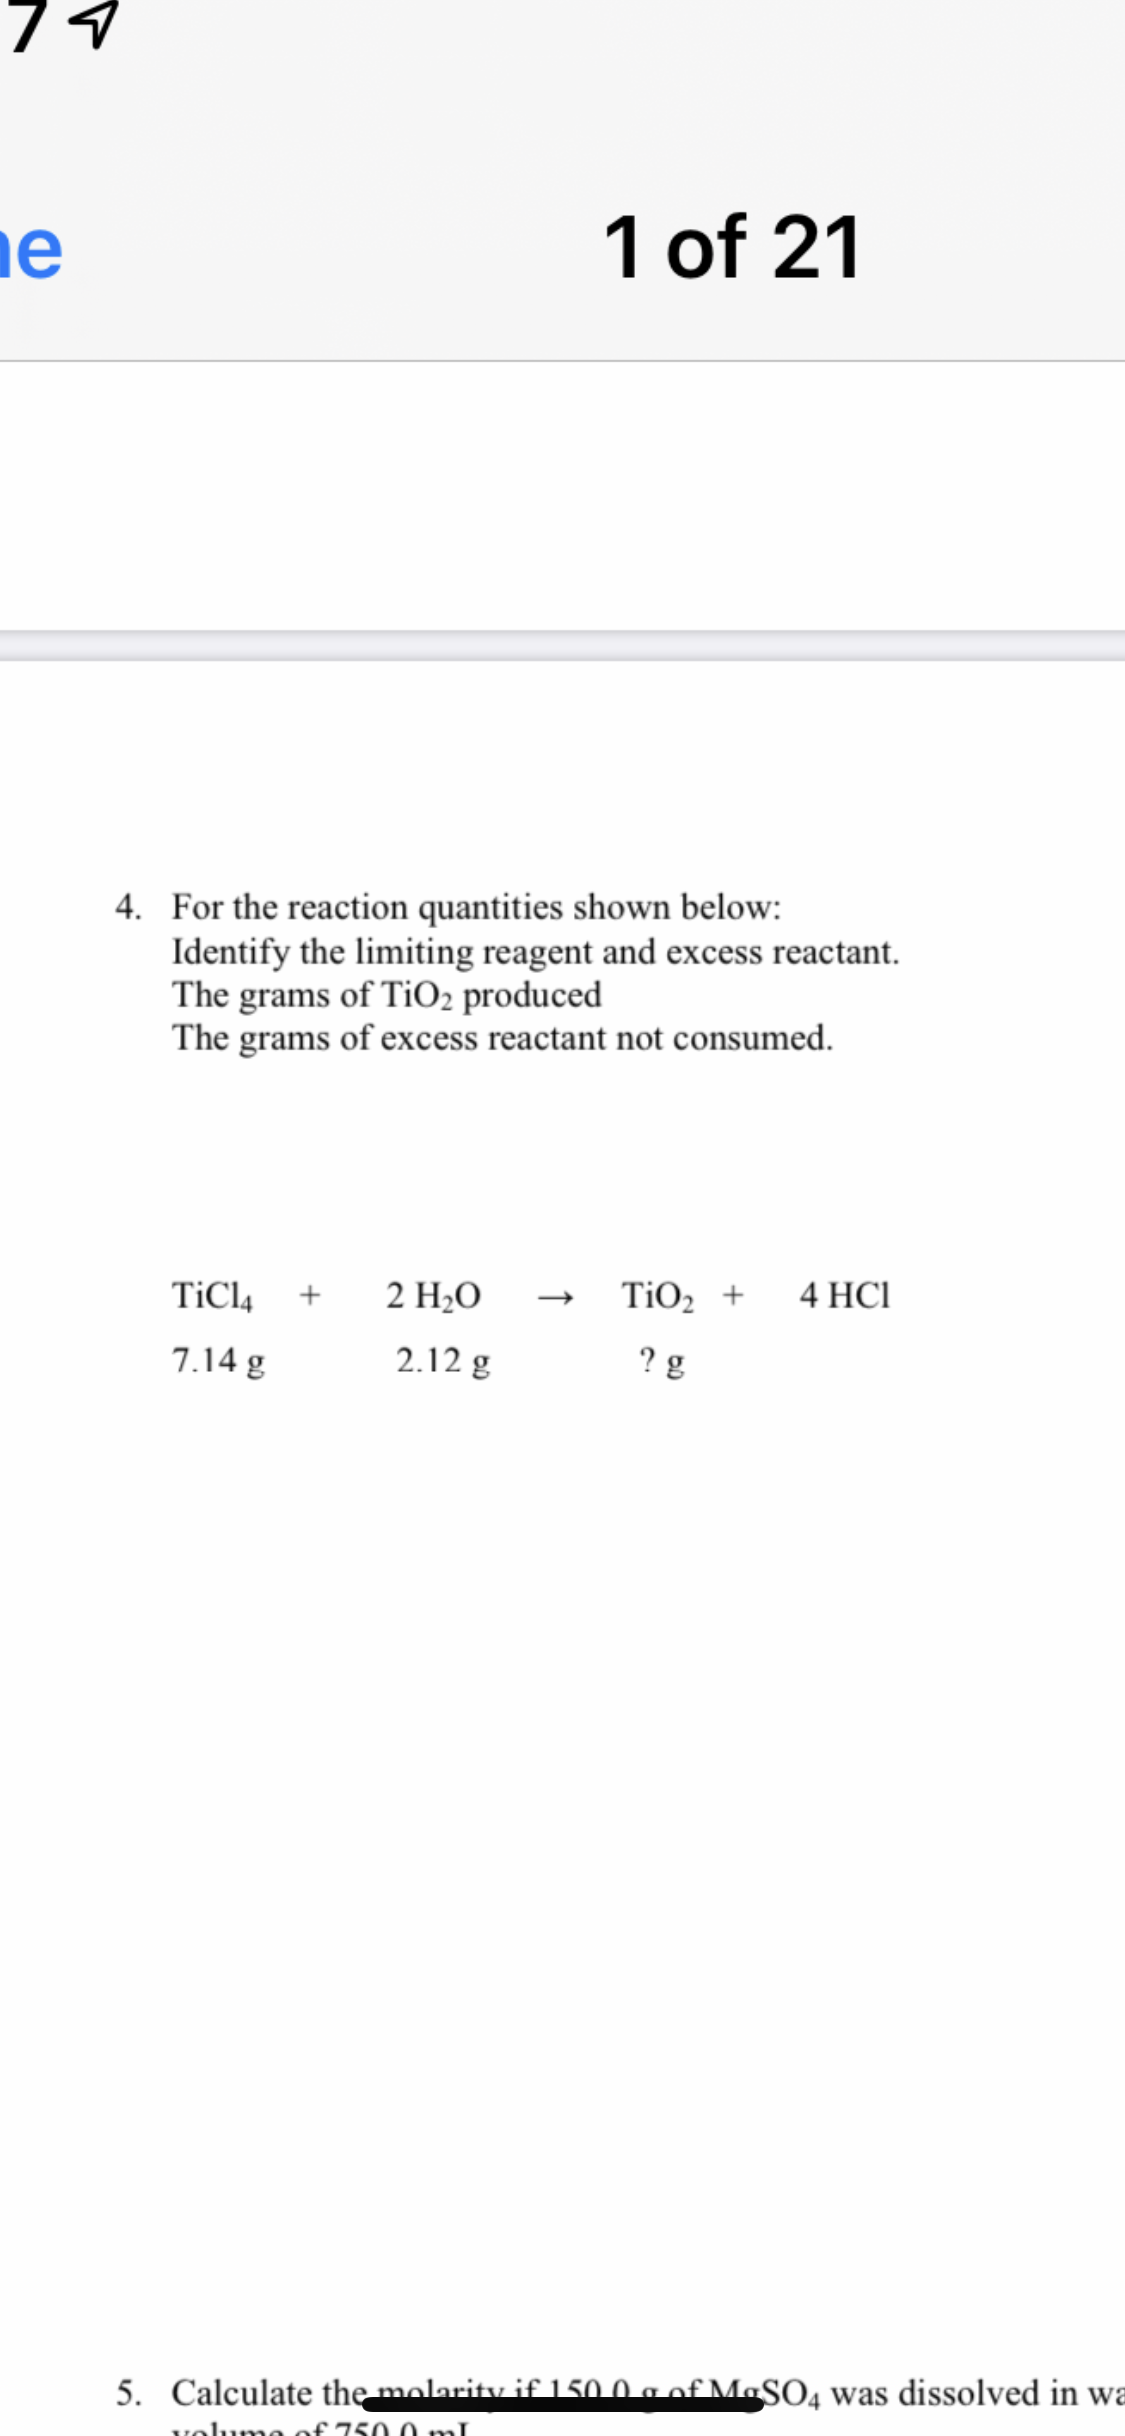 ne
1 of 21
4. For the reaction quantities shown below:
Identify the limiting reagent and excess reactant.
The grams of TIO2 produced
The grams of excess reactant not consumed.
TiCl4
2 Н.О
TiO2 +
4 HCI
7.14 g
2.12 g
? g
5. Calculate the molarity if 150.0 a of MaSO, was dissolved in wa
volumo of 750 0 mnl
